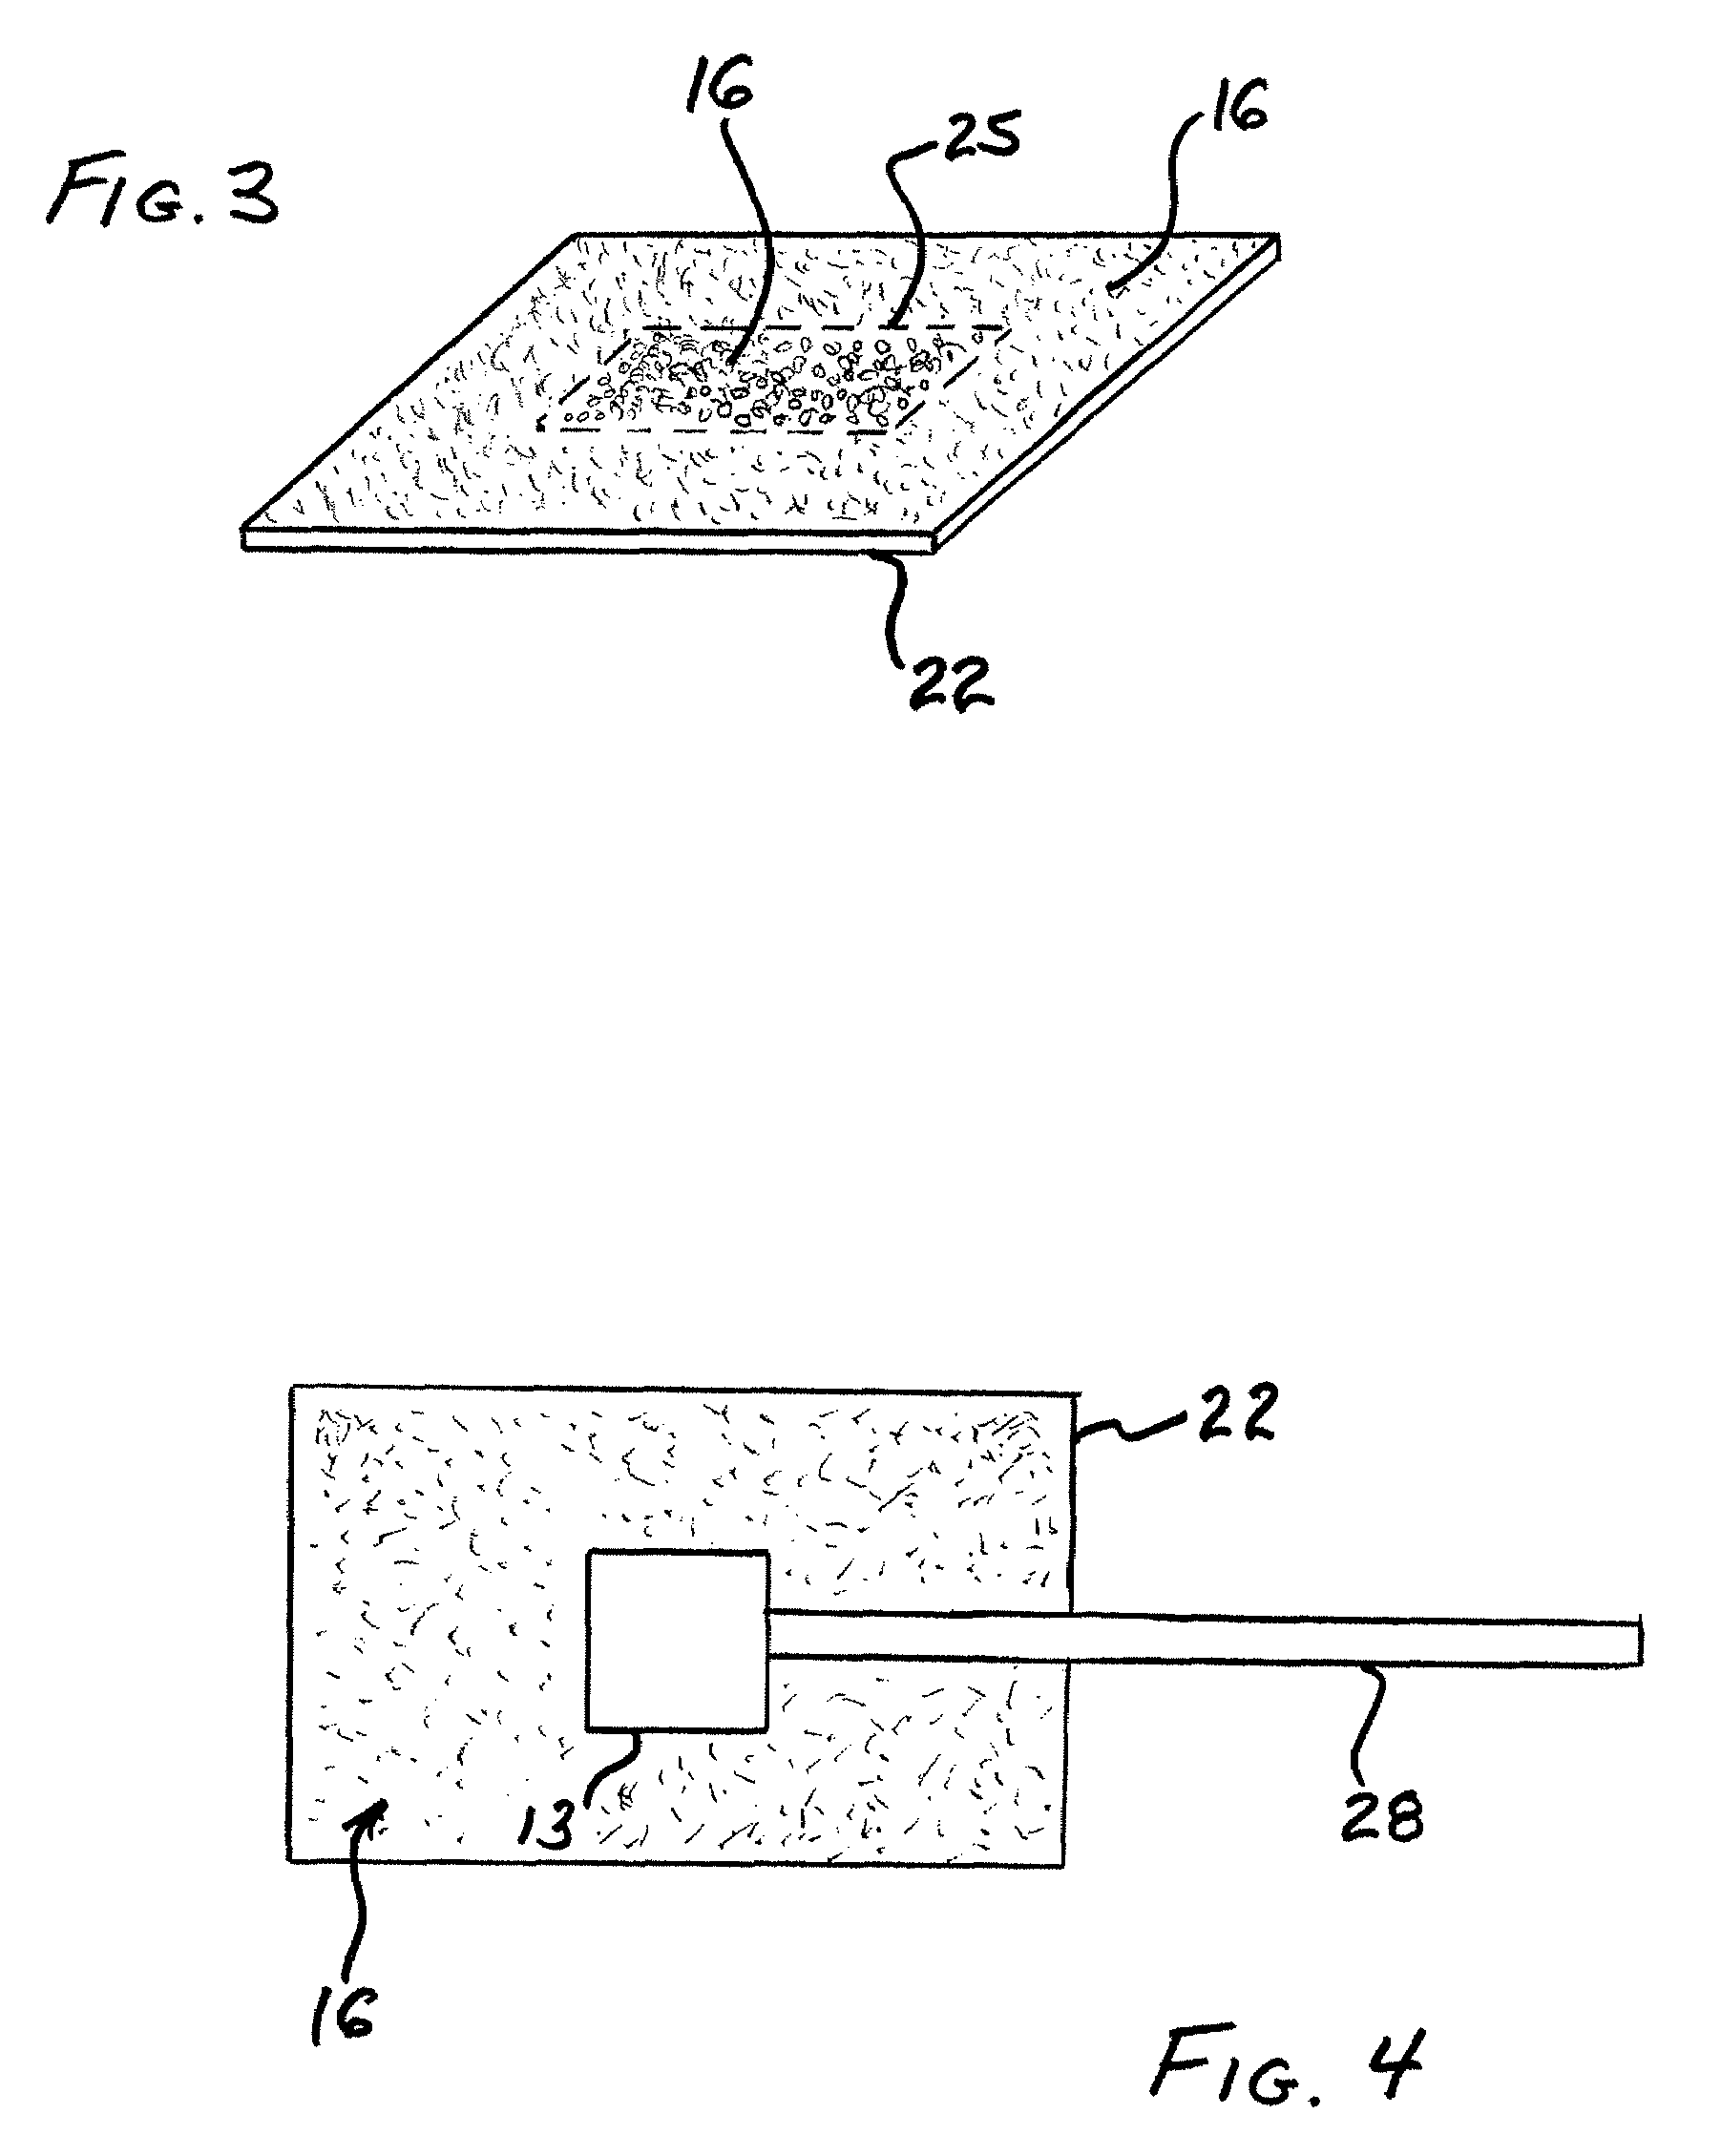 Biometric authentication device and method